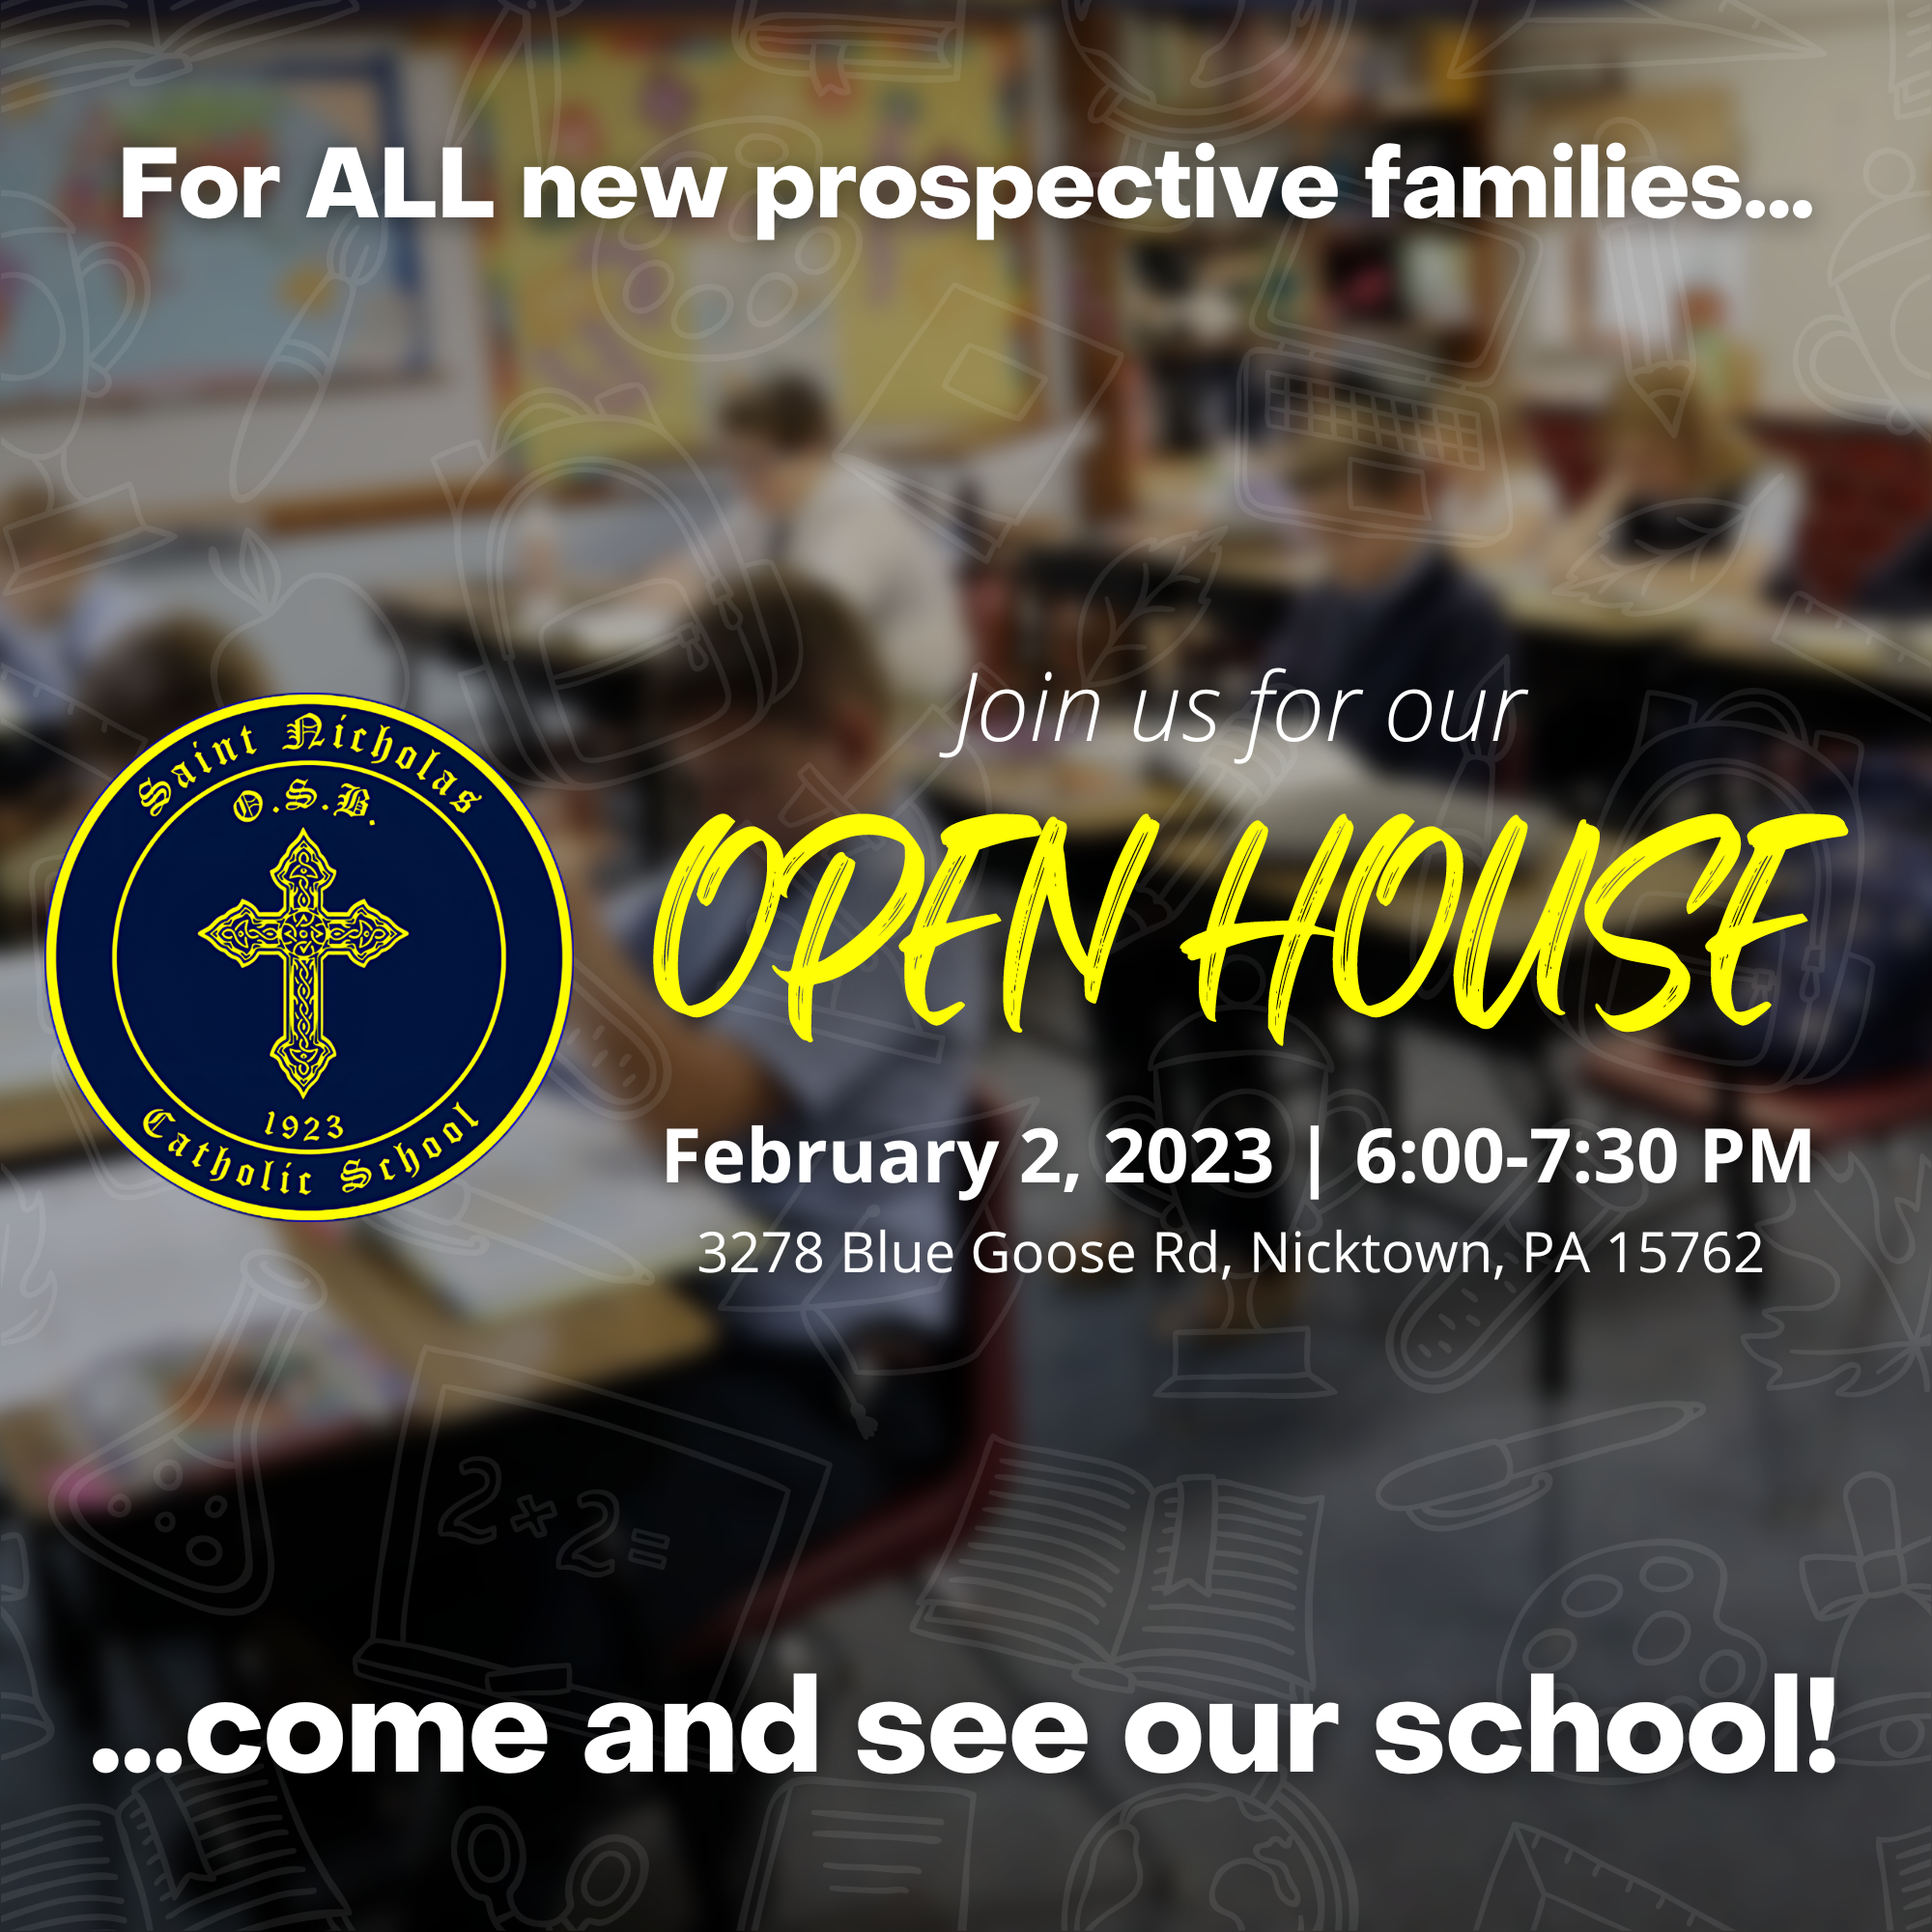 Visit our open house!